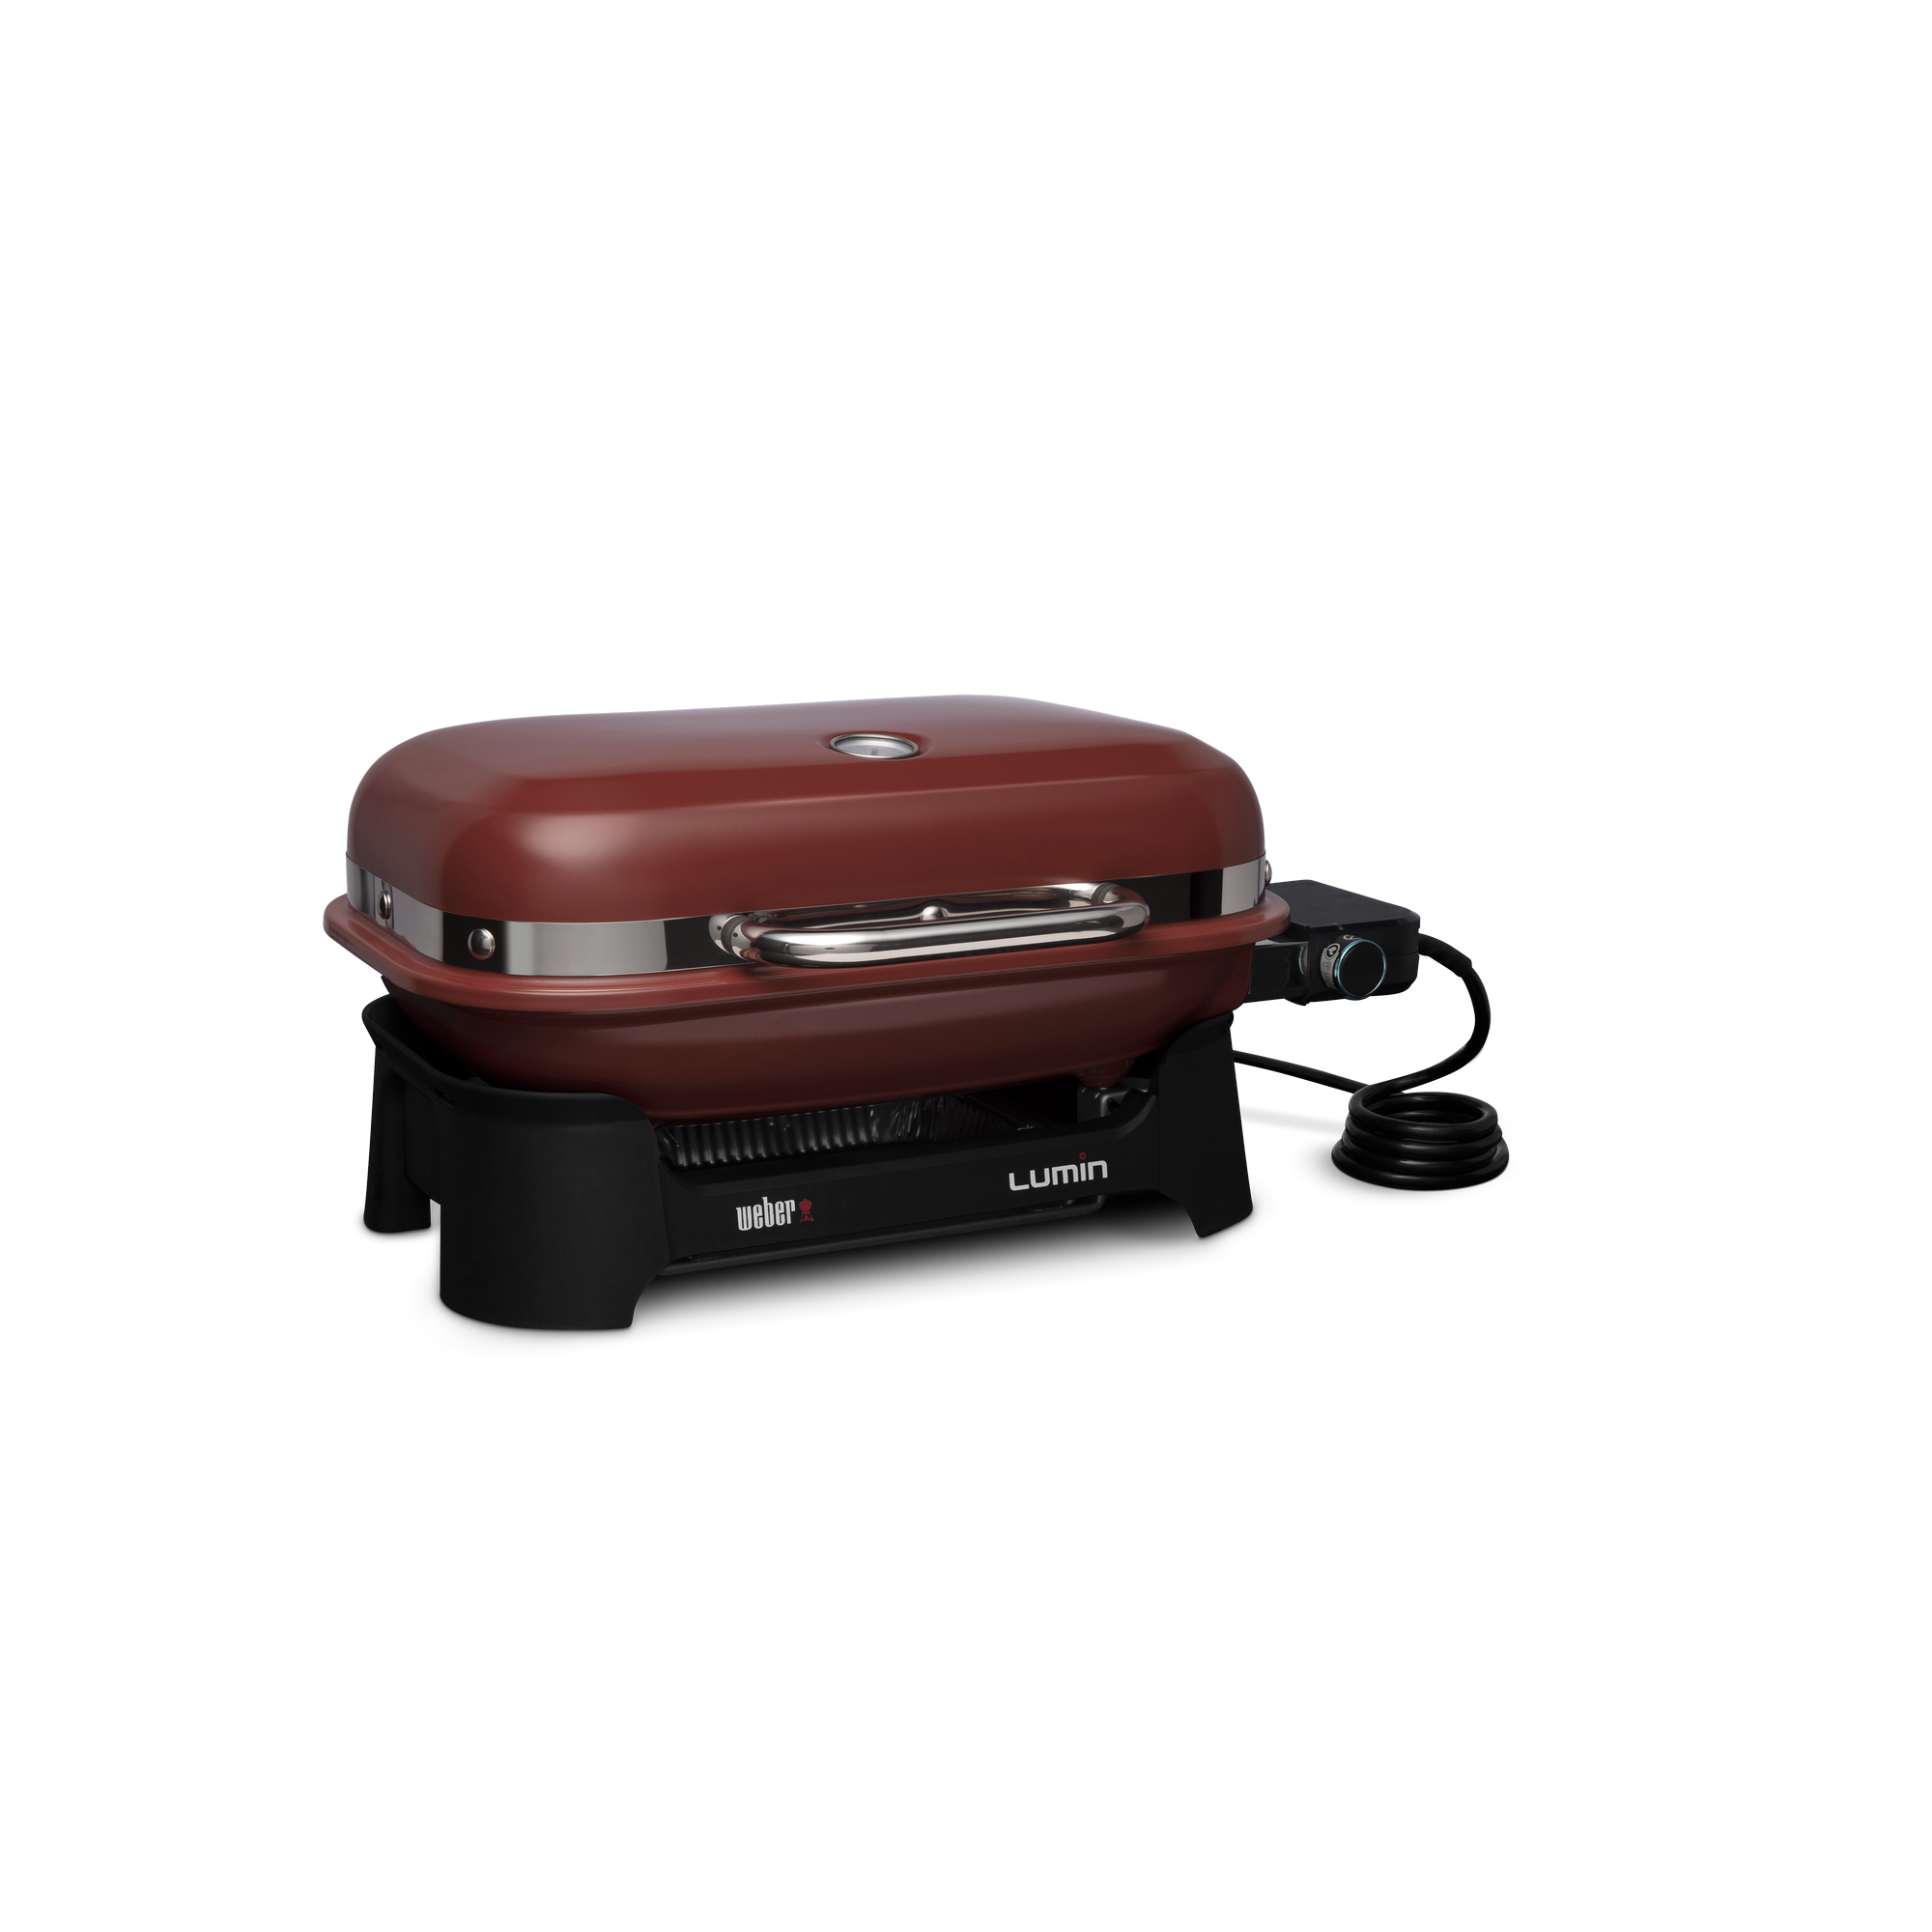 Elektrogrill 'Lumin Compact' rot 2200 W + product picture